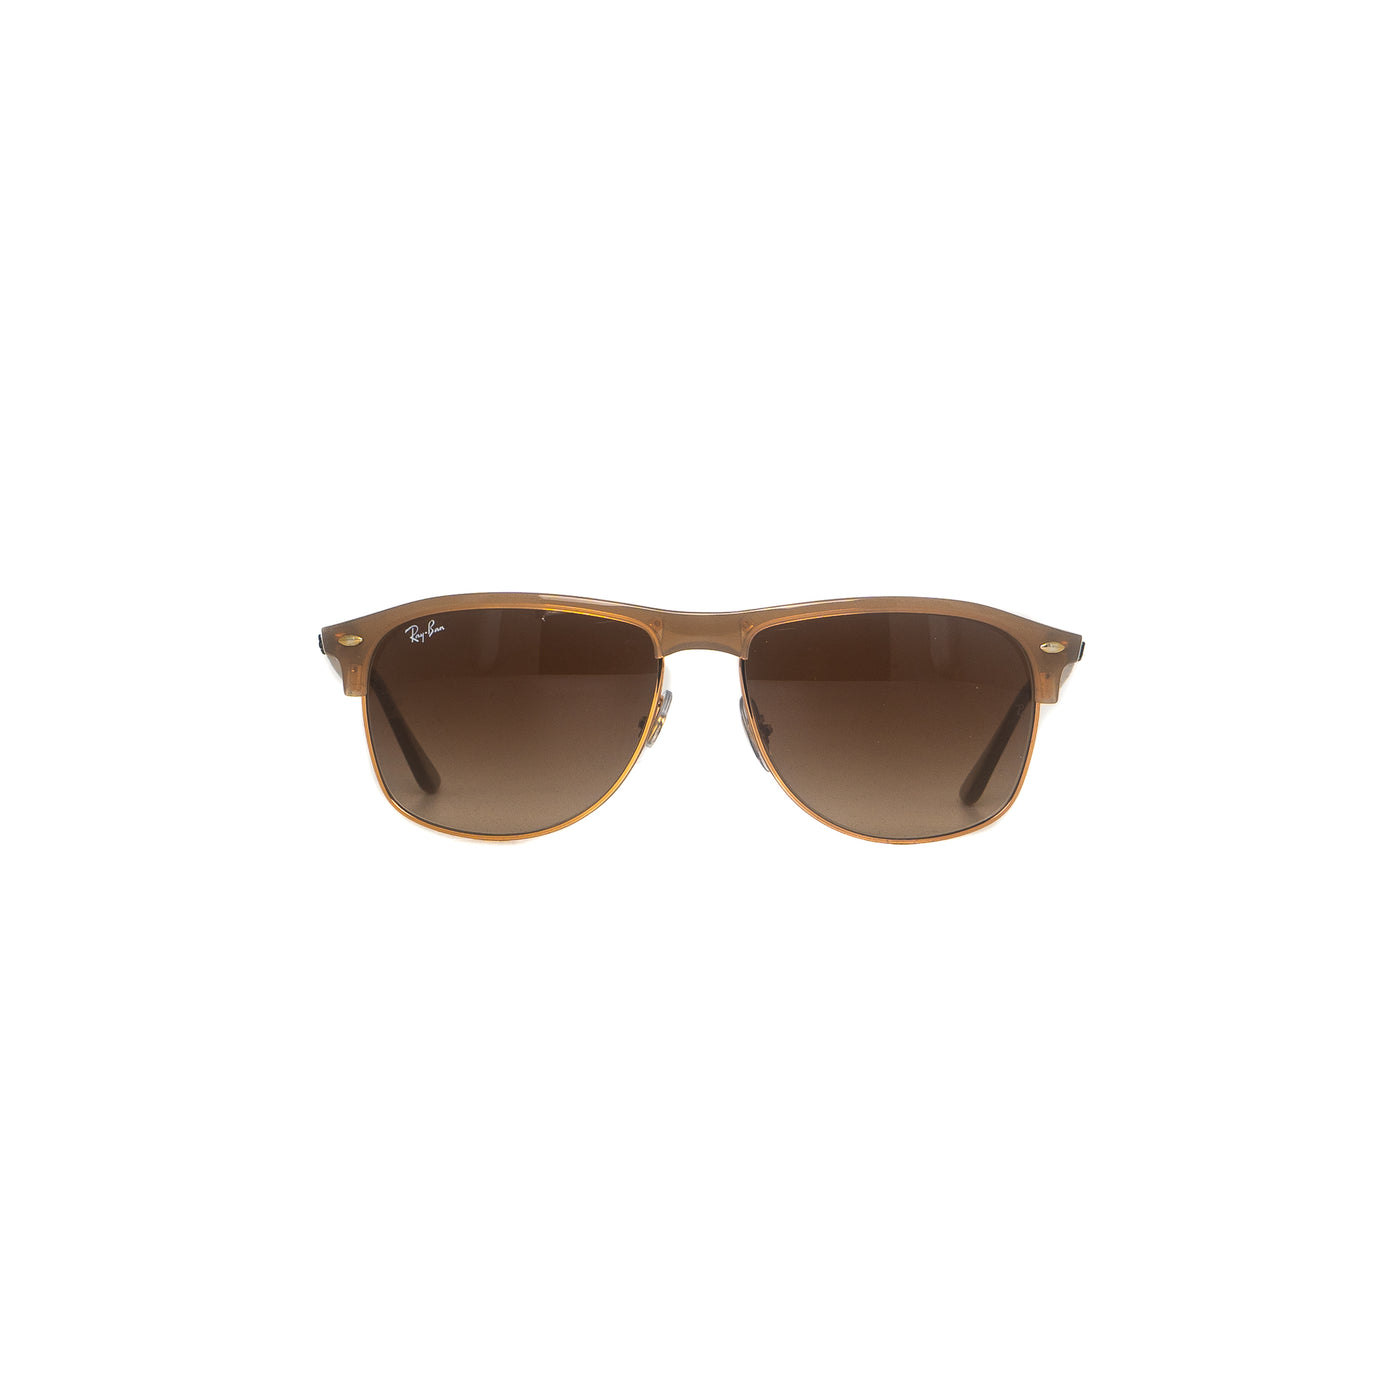 Ray-Ban Highstreet RB4342/6166/13 | Sunglasses - Vision Express Optical Philippines